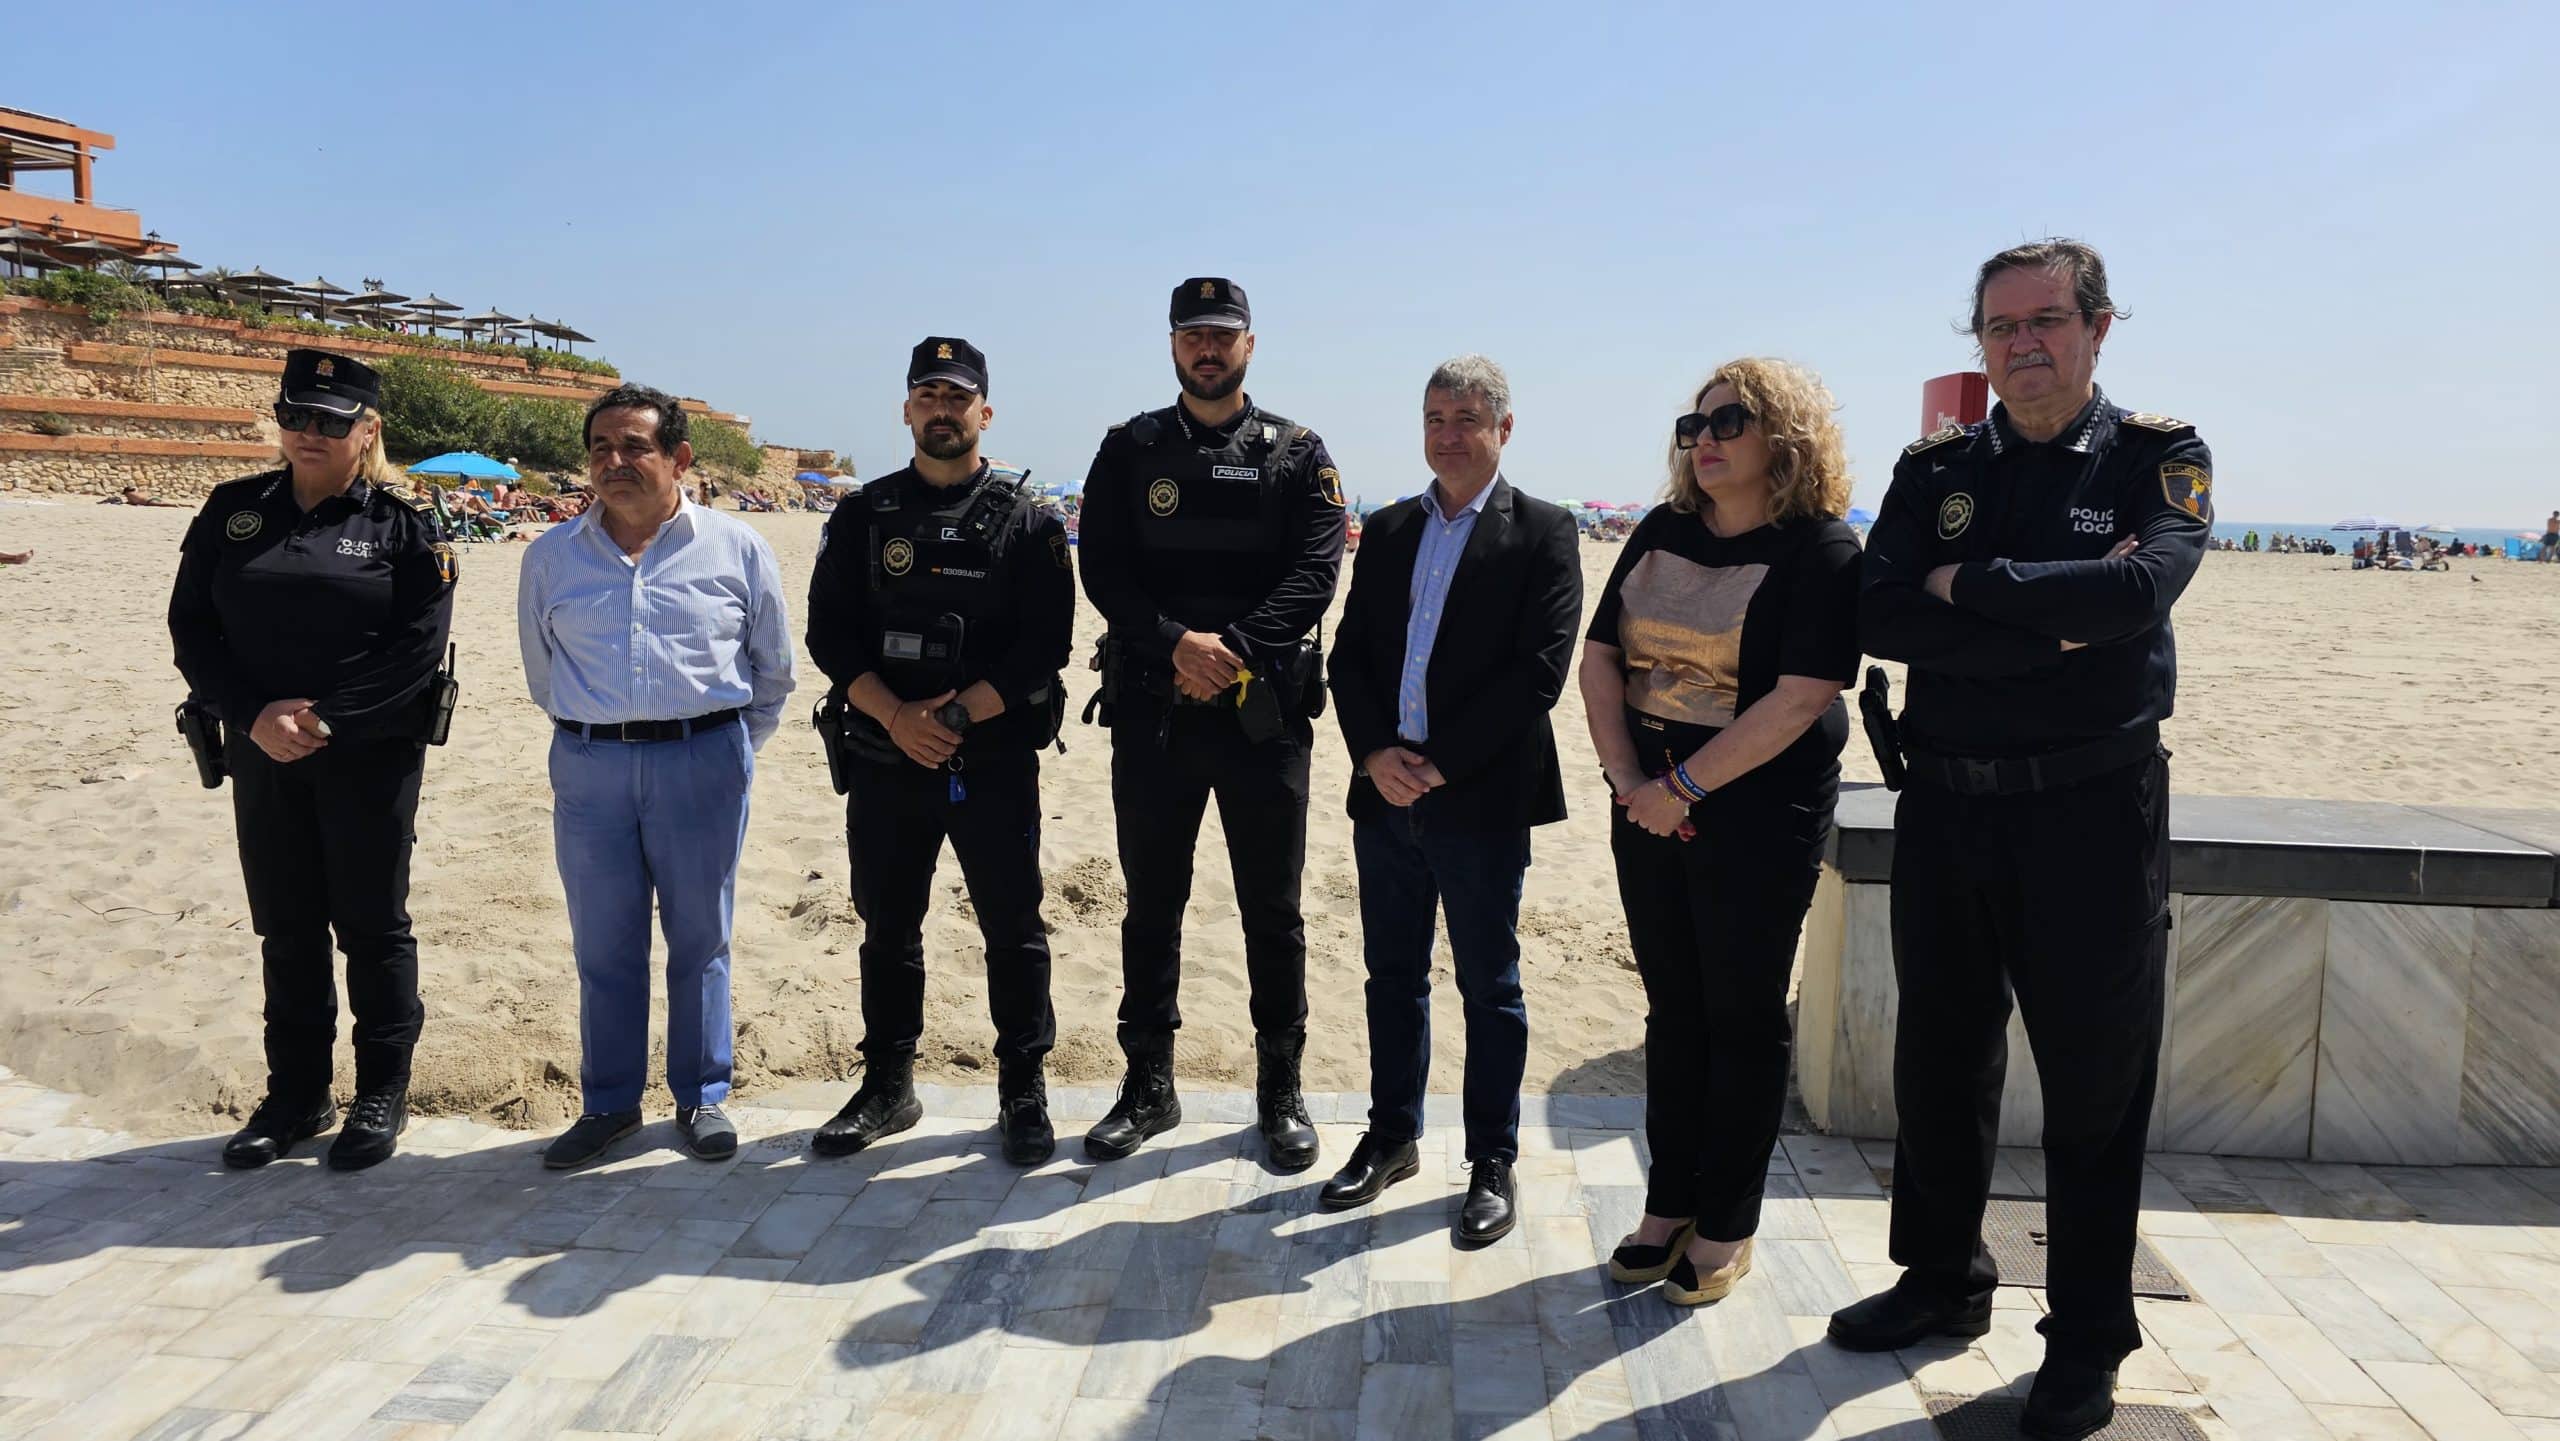 Mayor pays tribute to Orihuela Costa officers for saving 4 lives